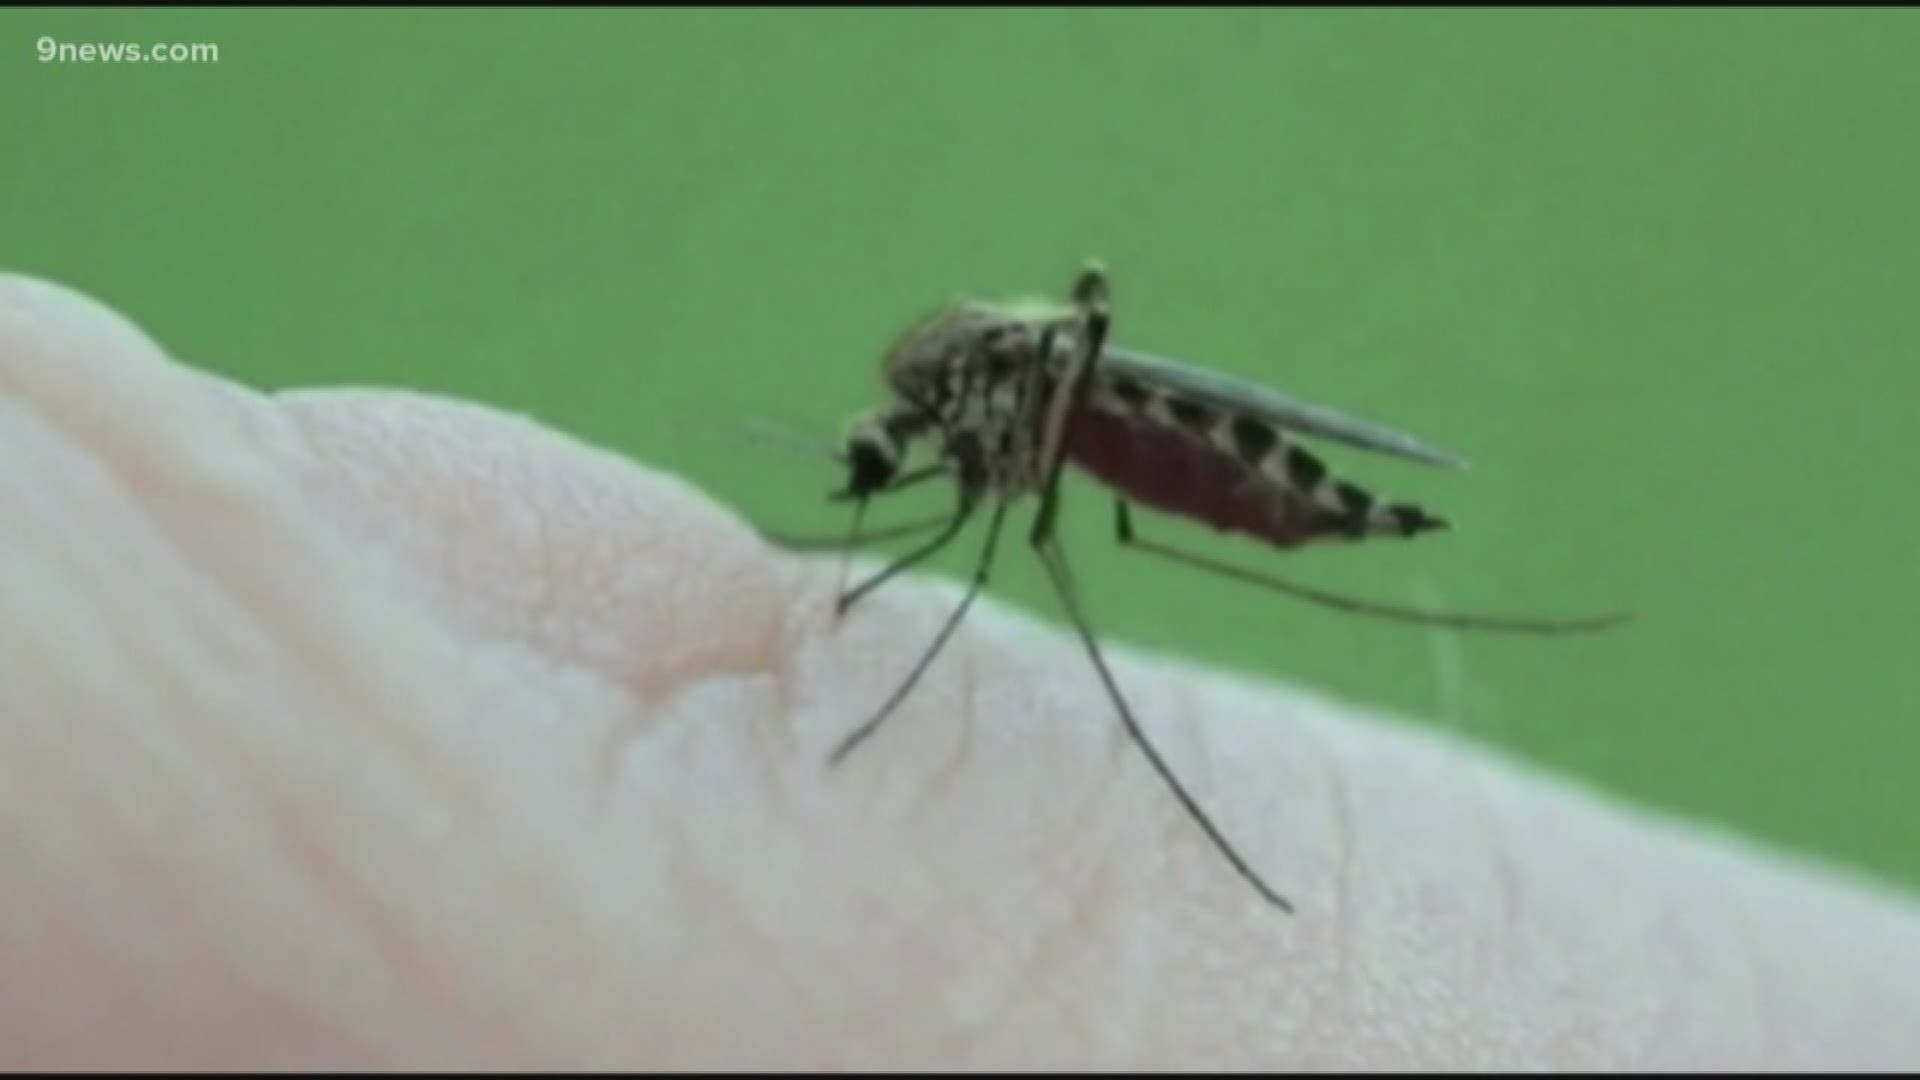 The Michigan Department of Health and Human Services is investigating three possible cases of Eastern Equine Encephalitis (EEE) in residents from Kalamazoo and Berrien counties. State health officials say there is an EEE vaccine available for horses, but not people. There are also two deer in Barry and Cass counties that were diagnosed with EEE.